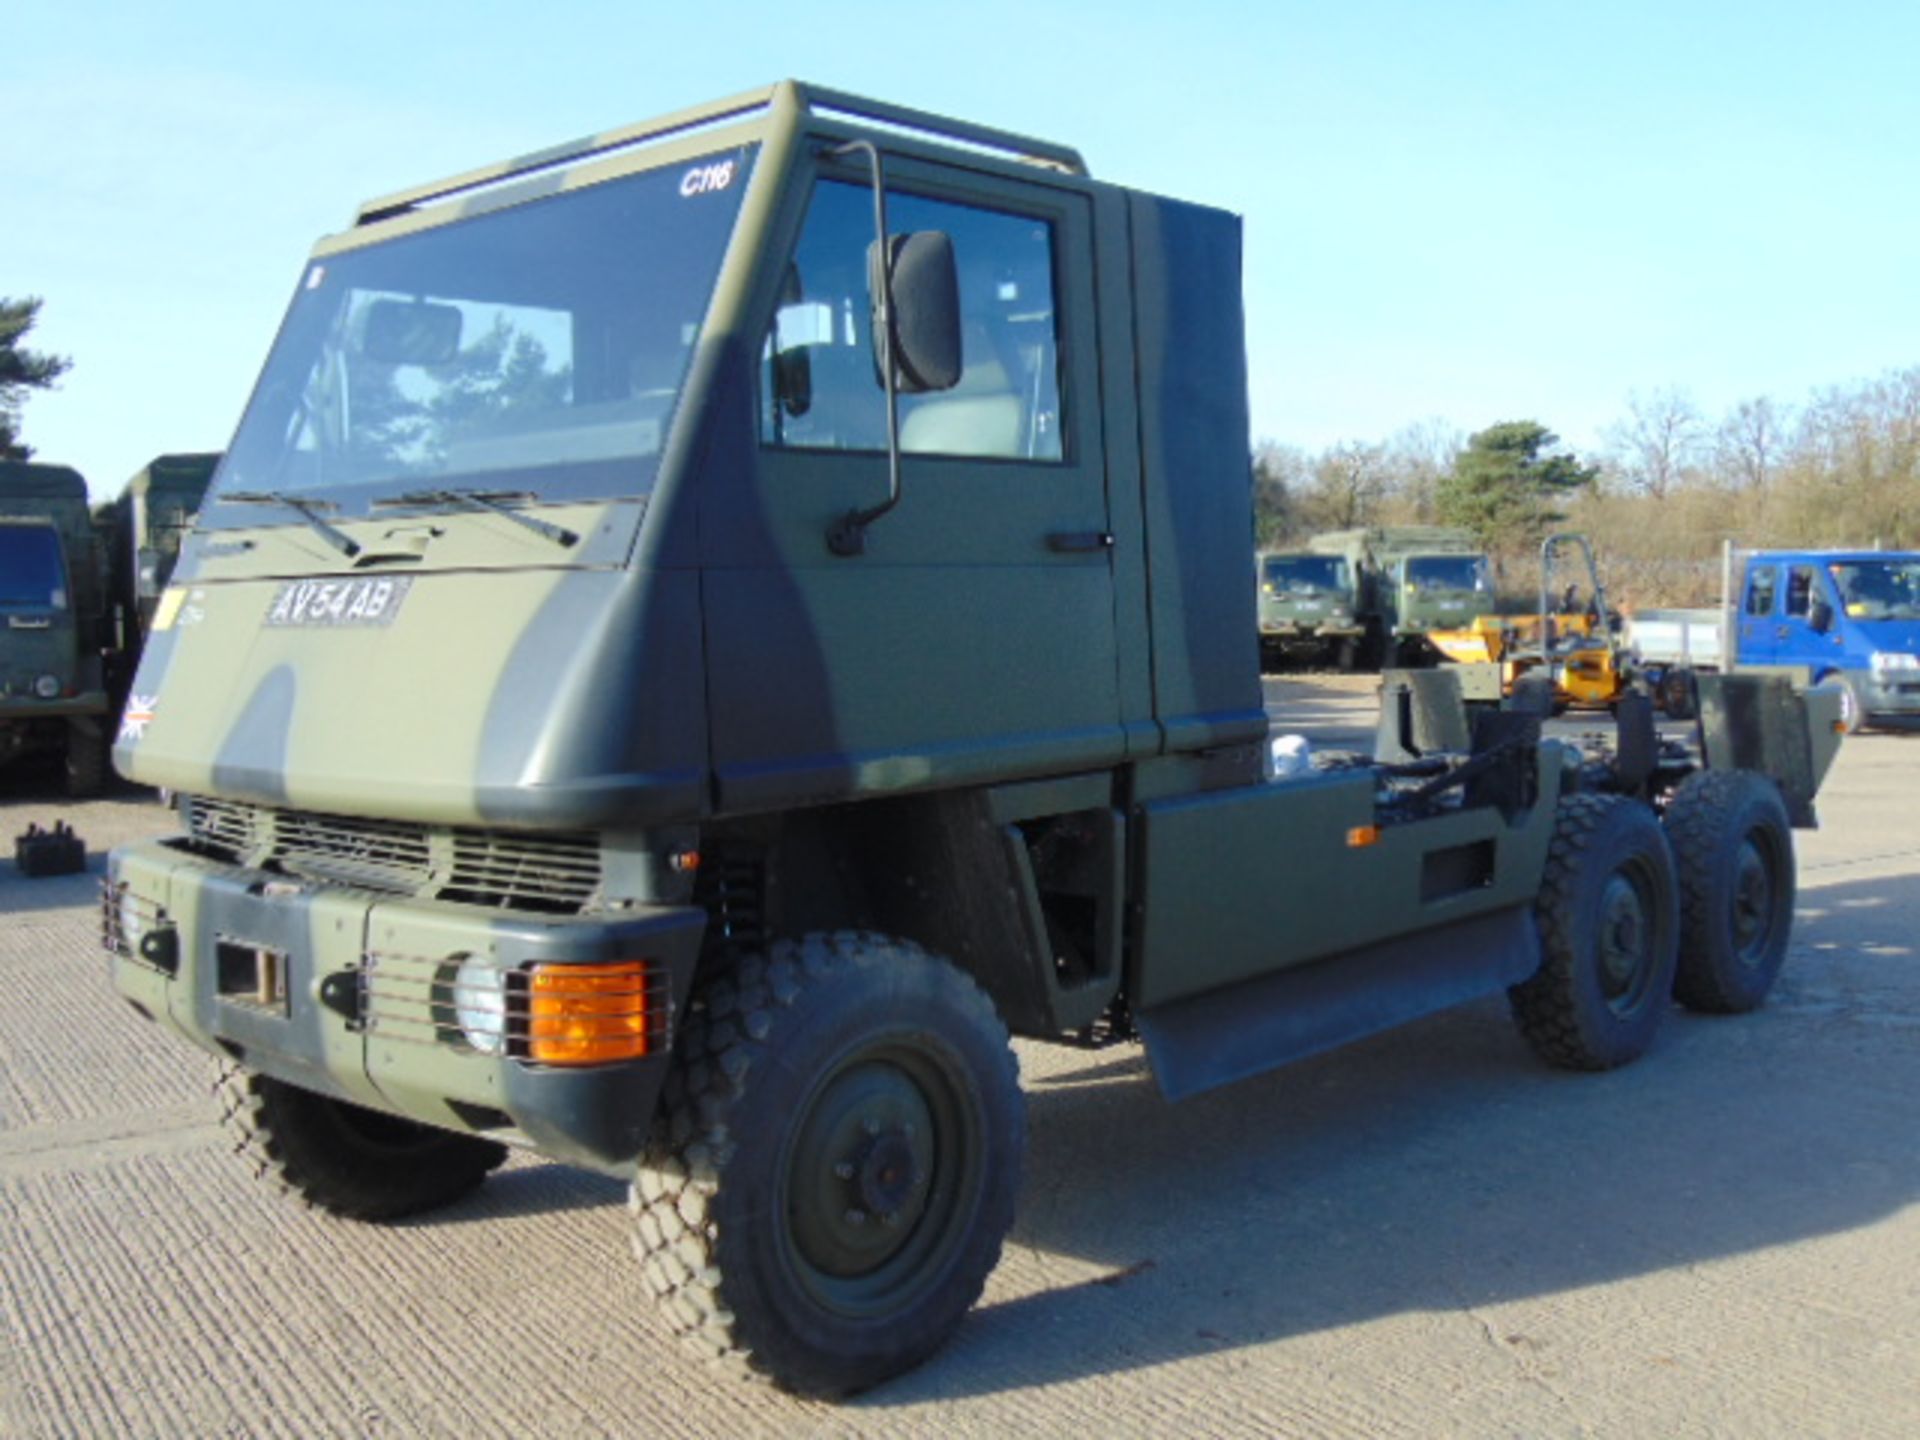 Ex Reserve Left Hand Drive Mowag Bucher Duro II 6x6 High-Mobility Tactical Vehicle - Image 3 of 11